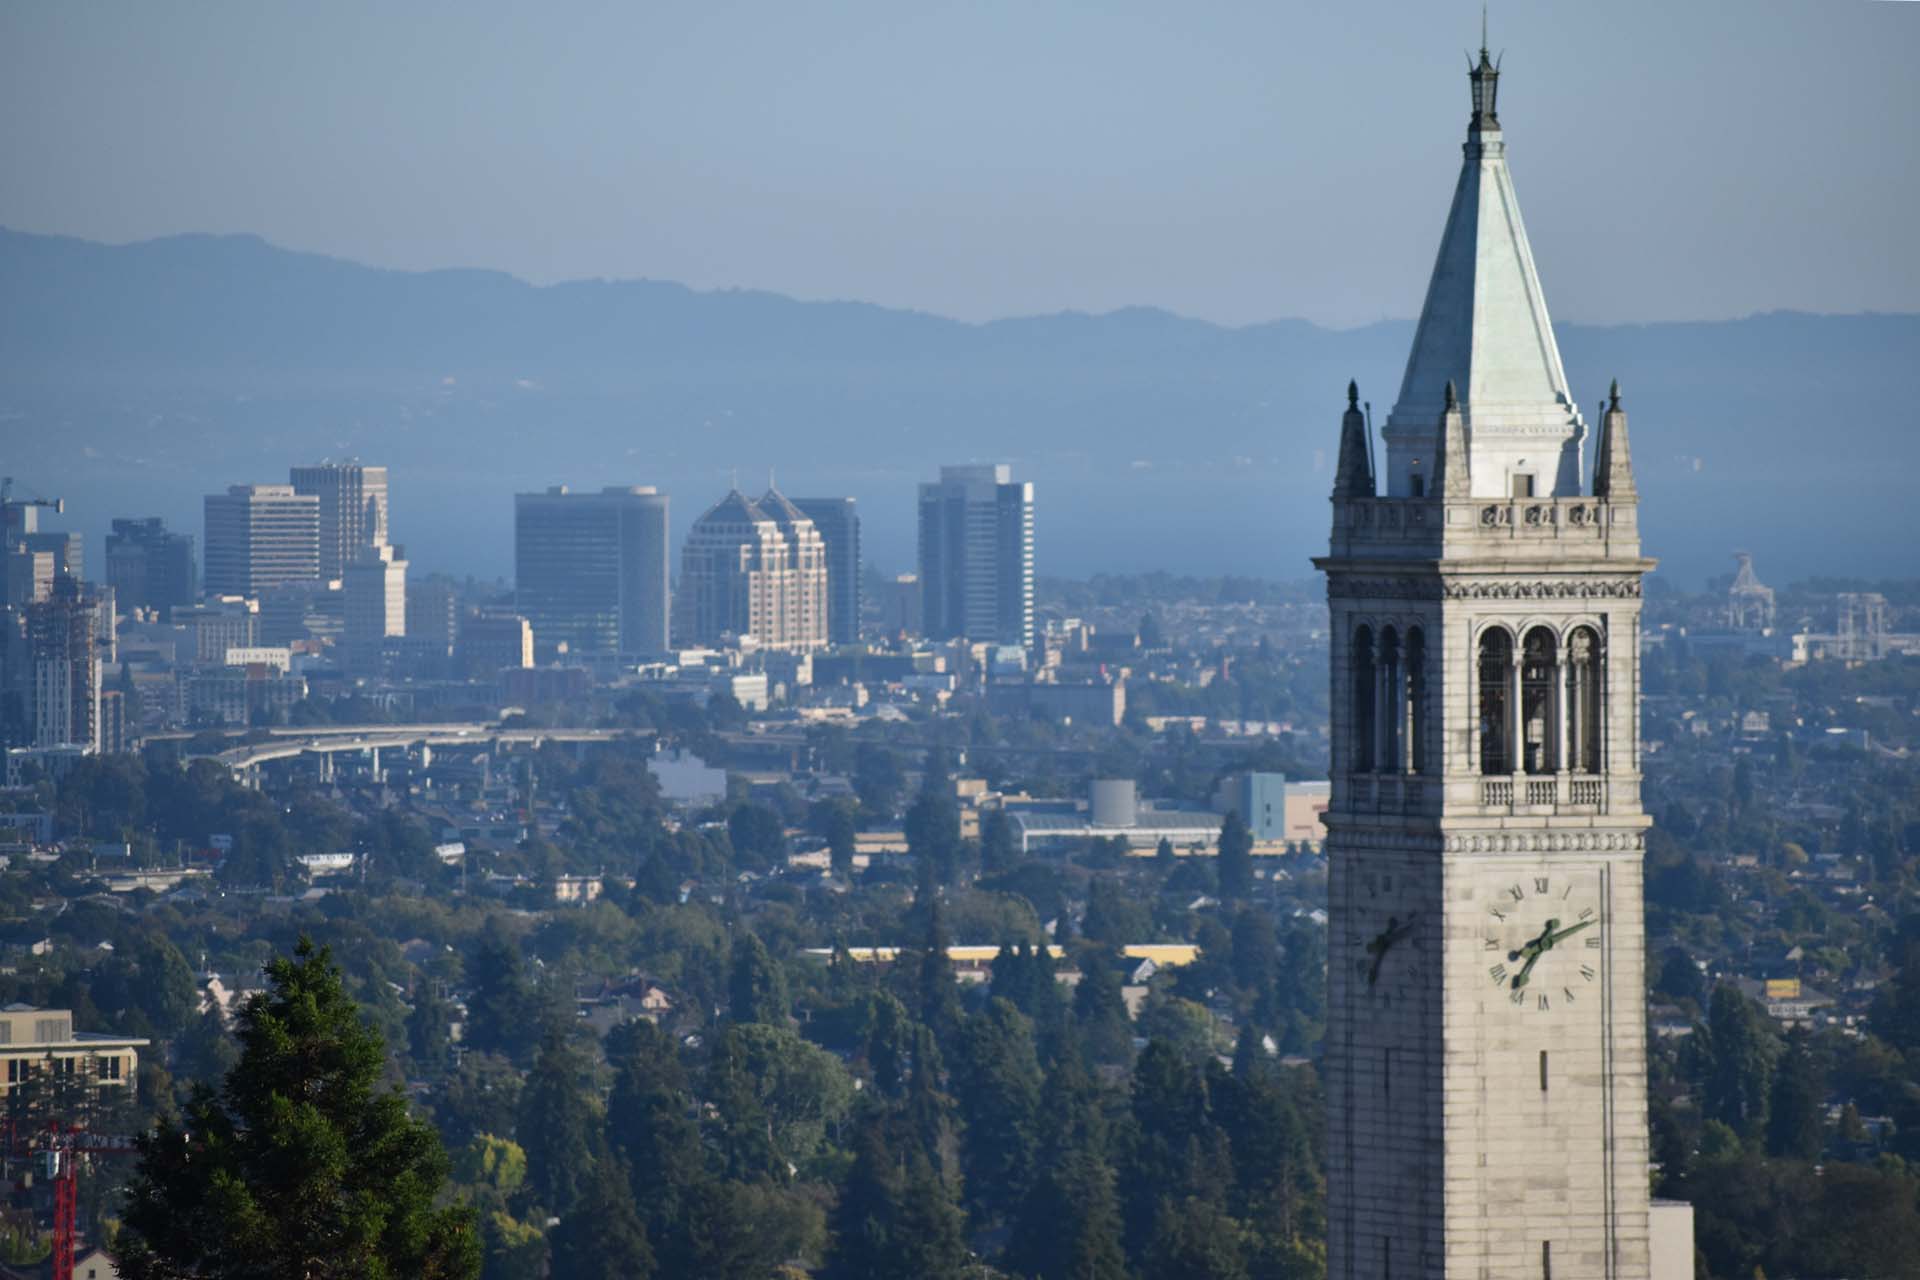 The image shows the tall, pointed clock tower of the University of California, Berkeley set against a backdrop of a sprawling urban skyline with various modern buildings and distant mountains under a clear, blue sky. Trees are visible in the foreground.